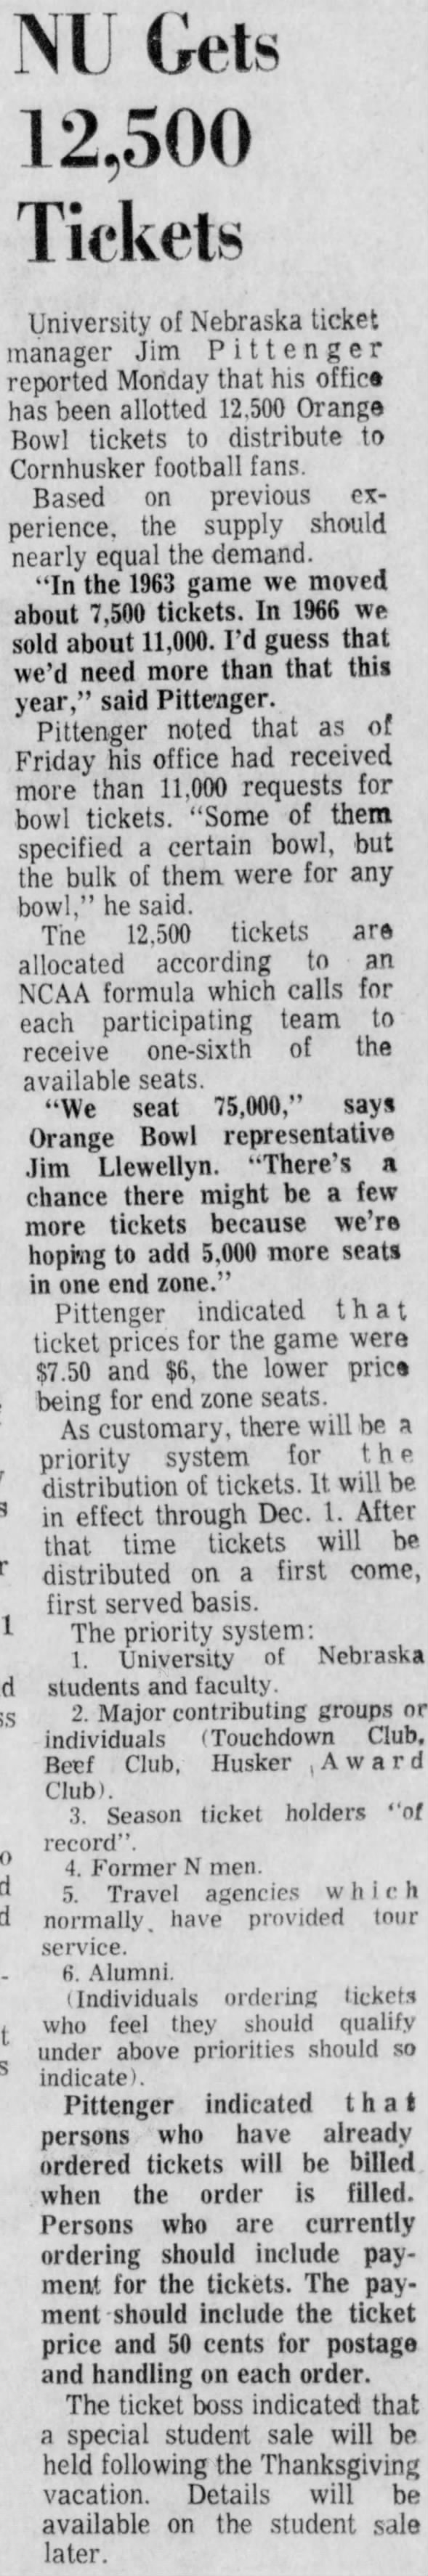 1970.11.15 Bowl tickets allotted